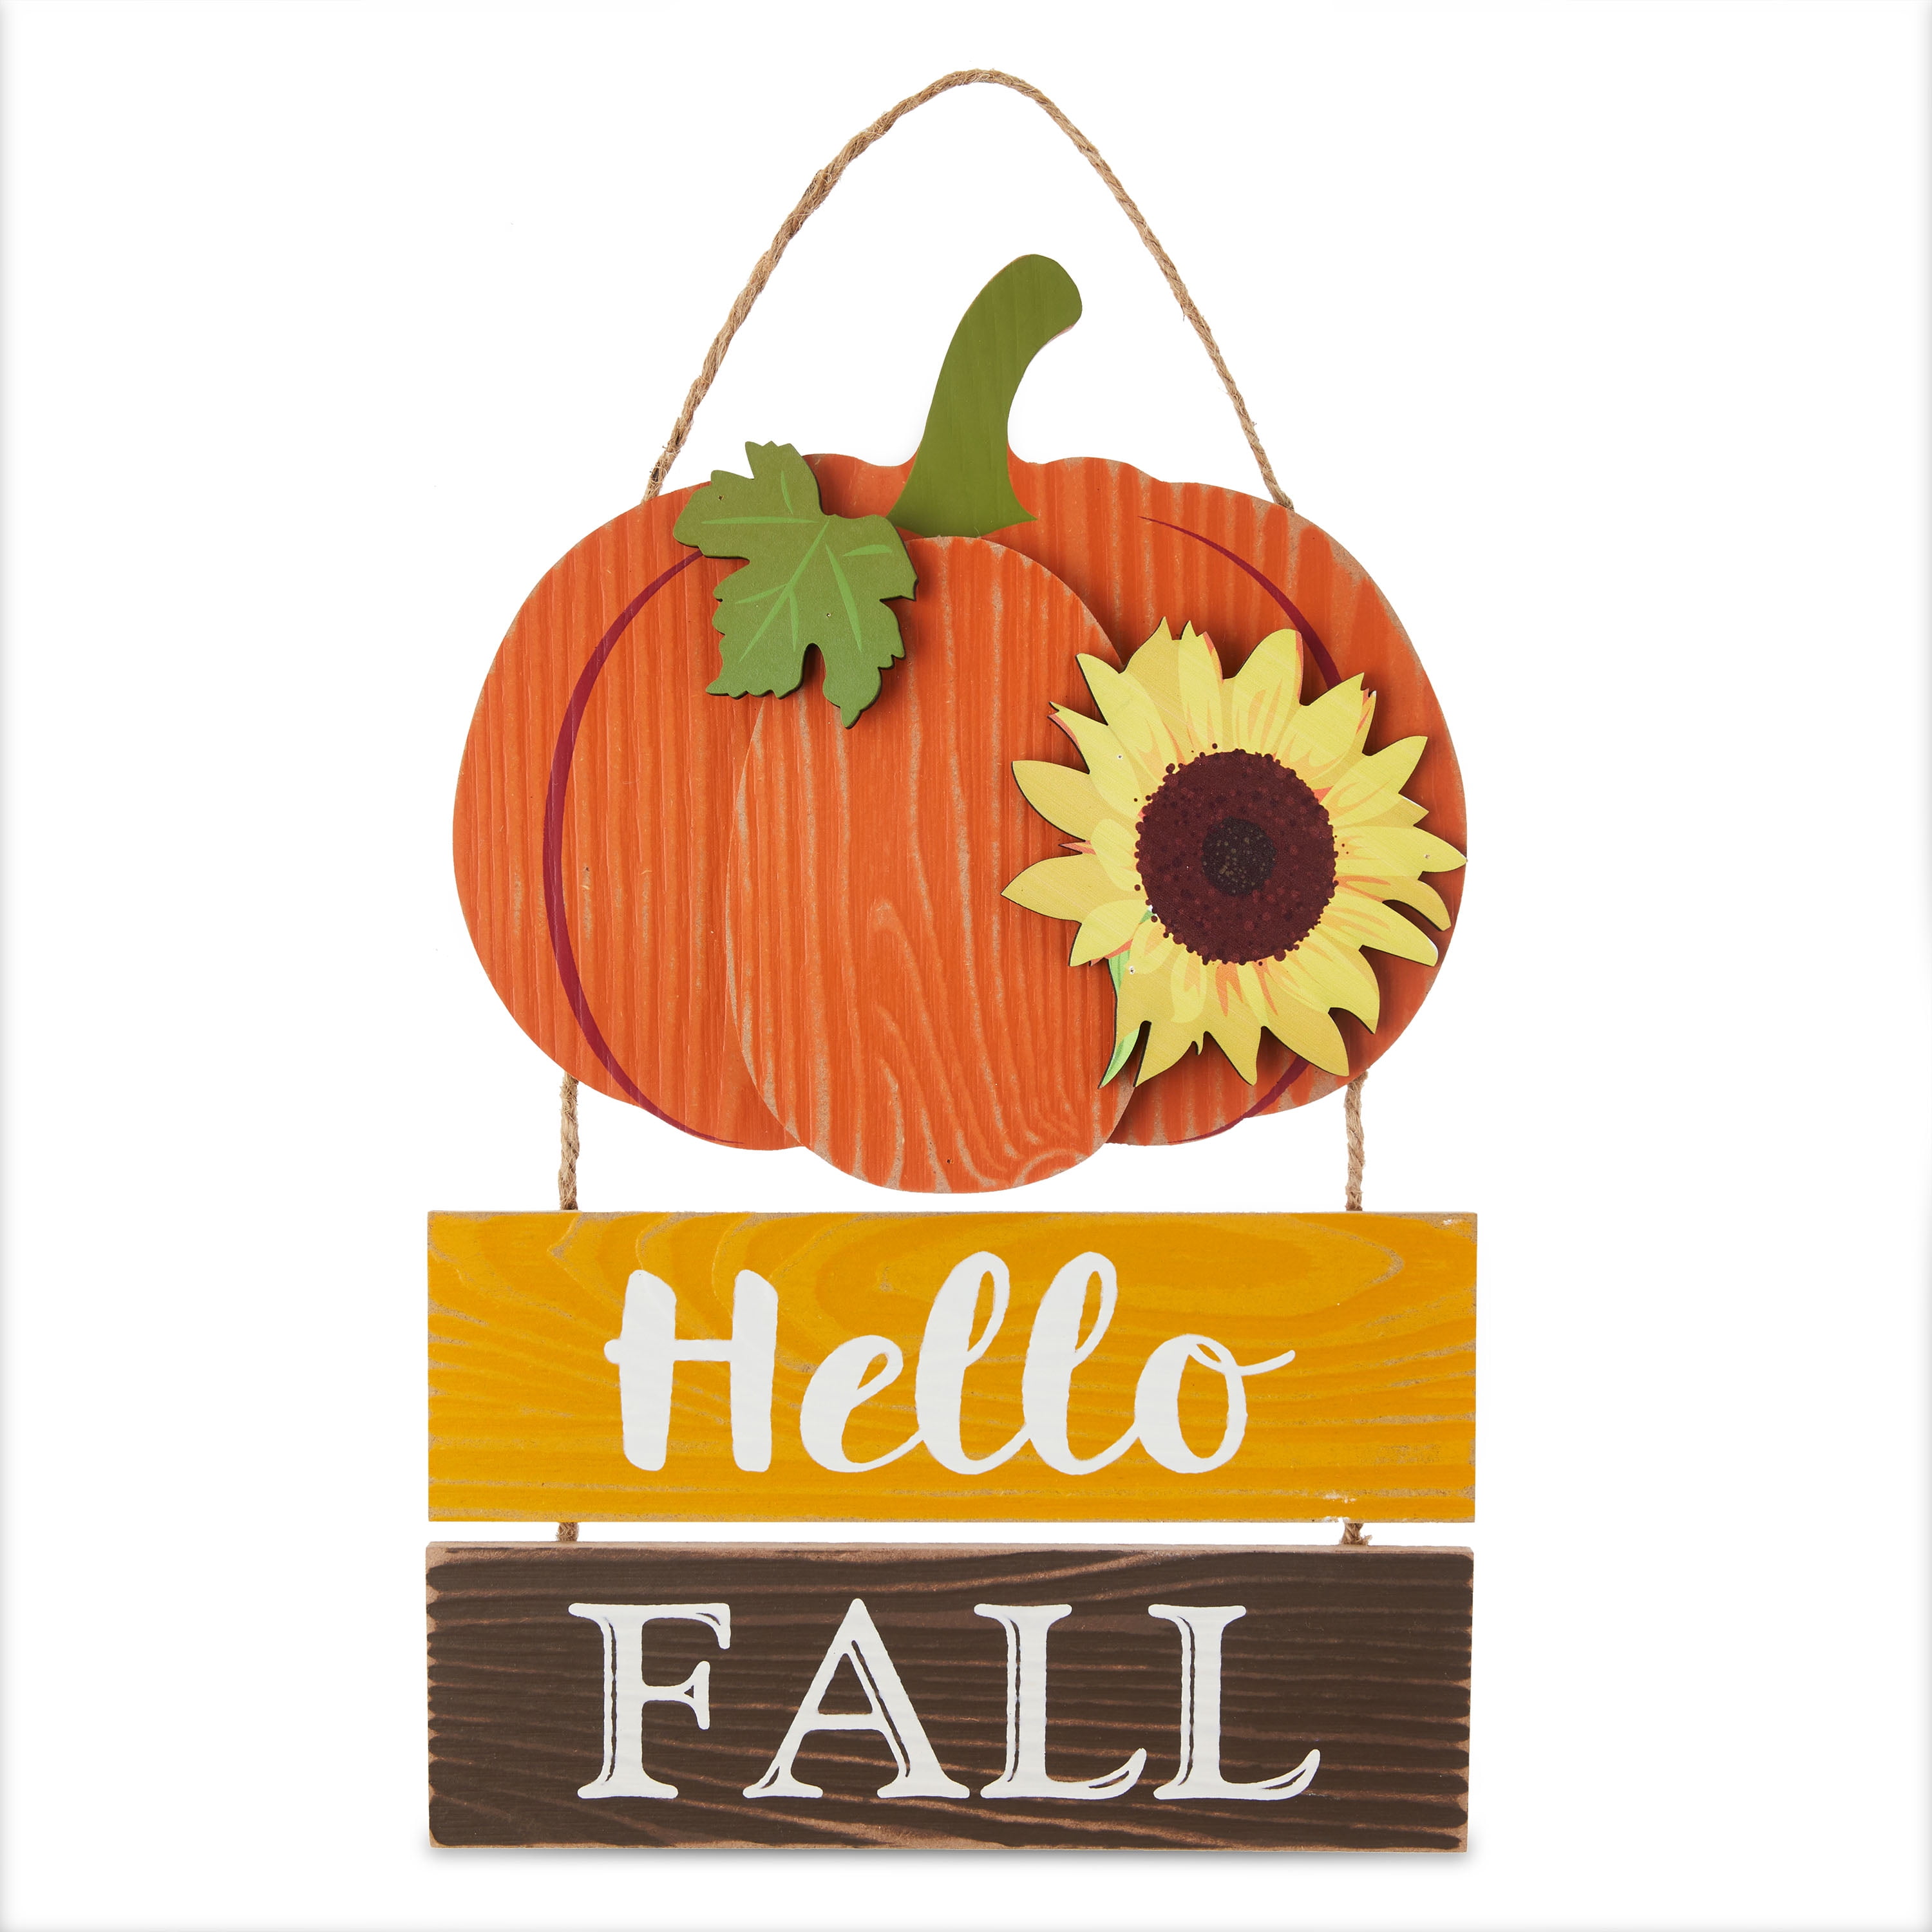 Way to Celebrate Harvest 12-inch Wood Pumpkin Wall Hanging Decoration, Hello Fall